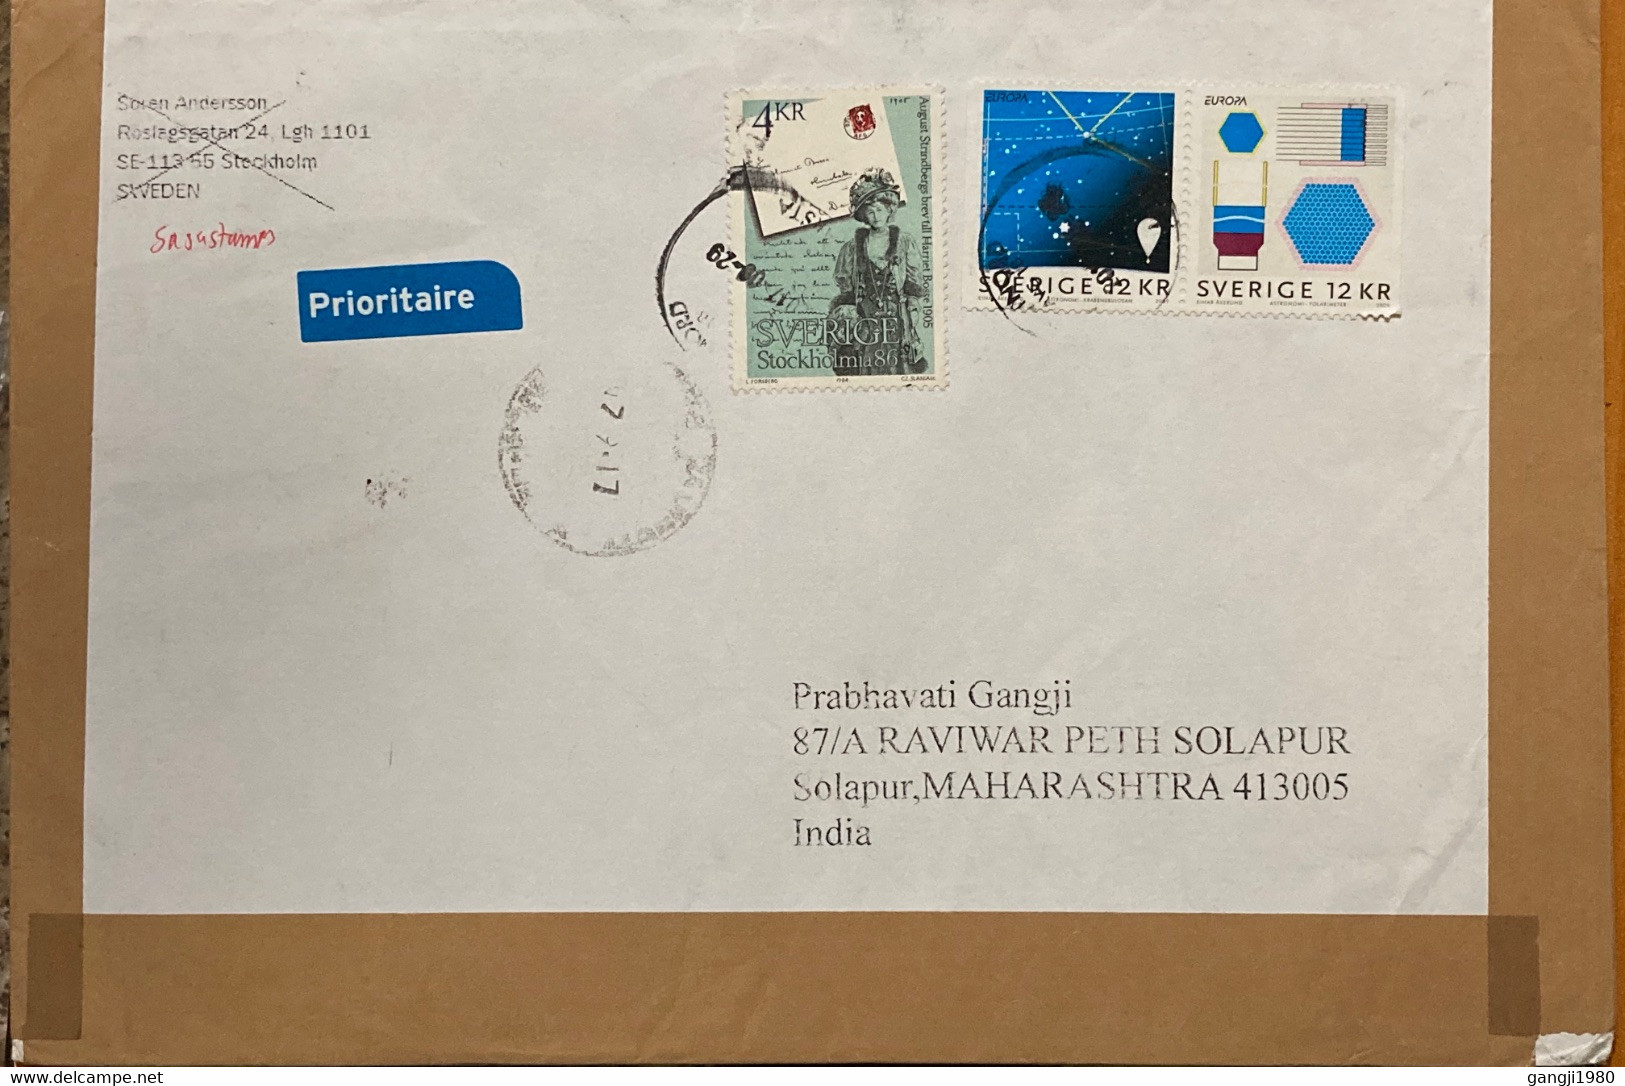 SWEDEN 2009, EUROPA SE-TENENT ,COVER ON STAMP ! STOCKHOLMIA 86 ,3 STAMP USED COVER TO INDIA - Covers & Documents